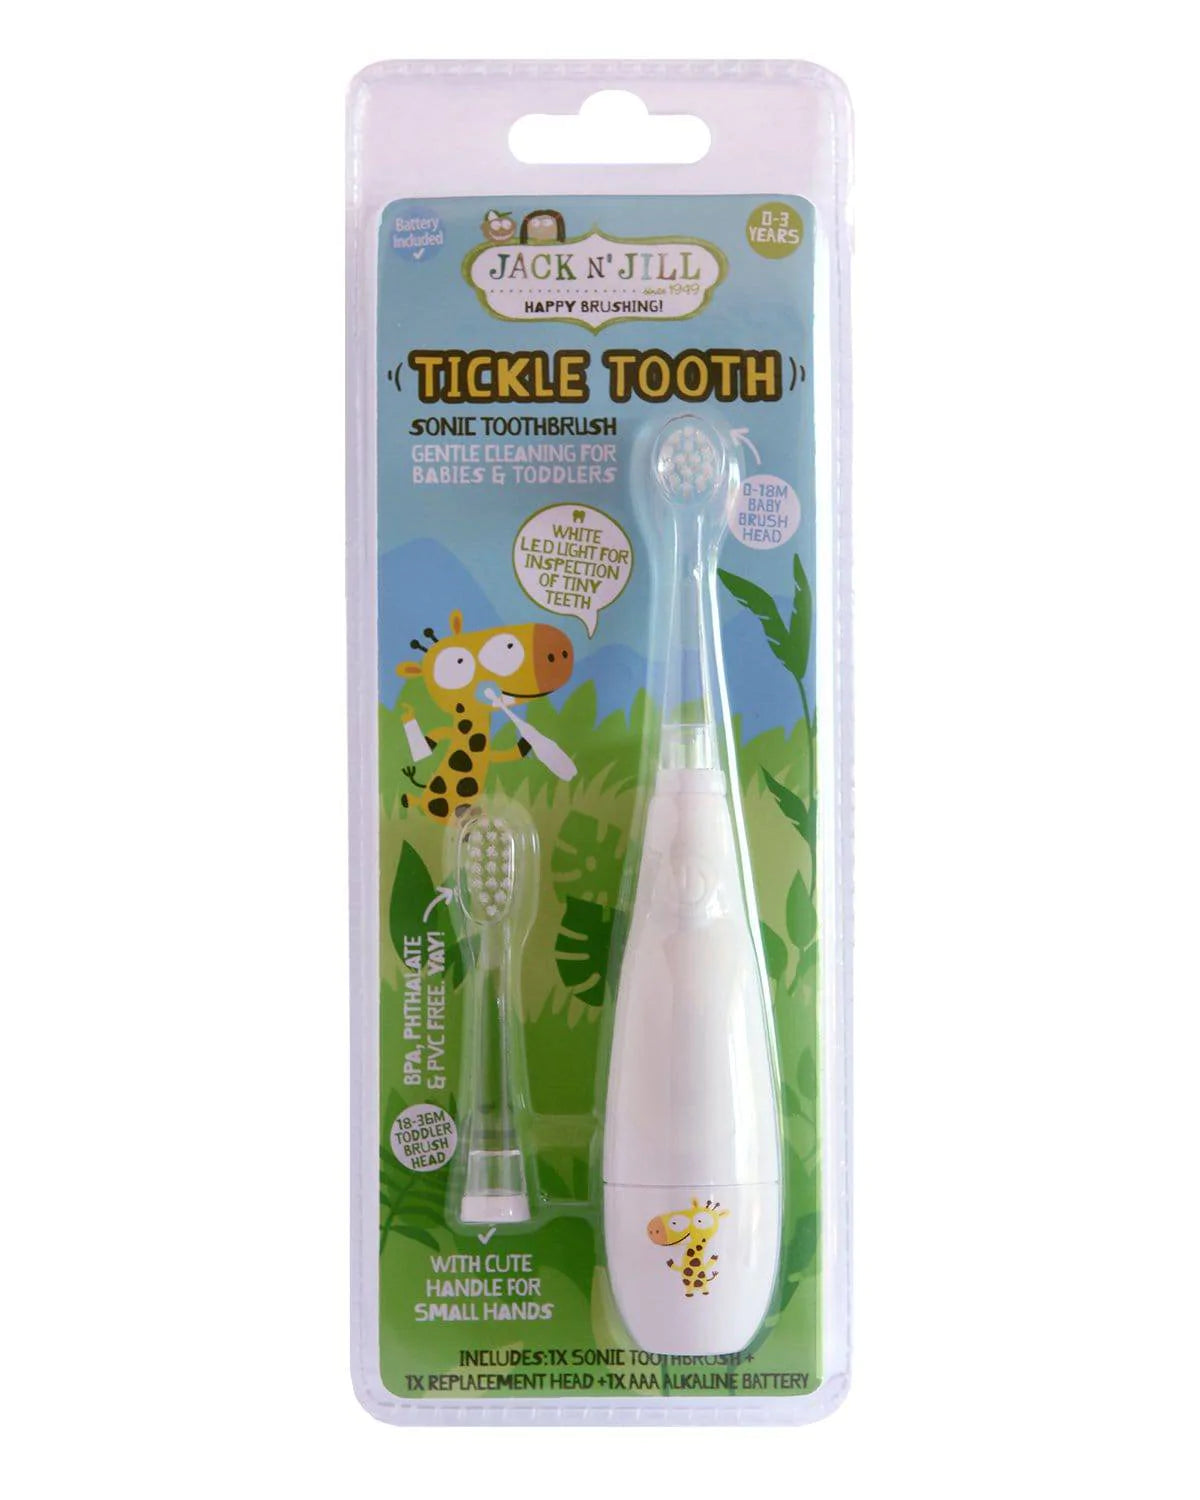 Tickle Tooth Sonic Toothbrush (0-6yrs)